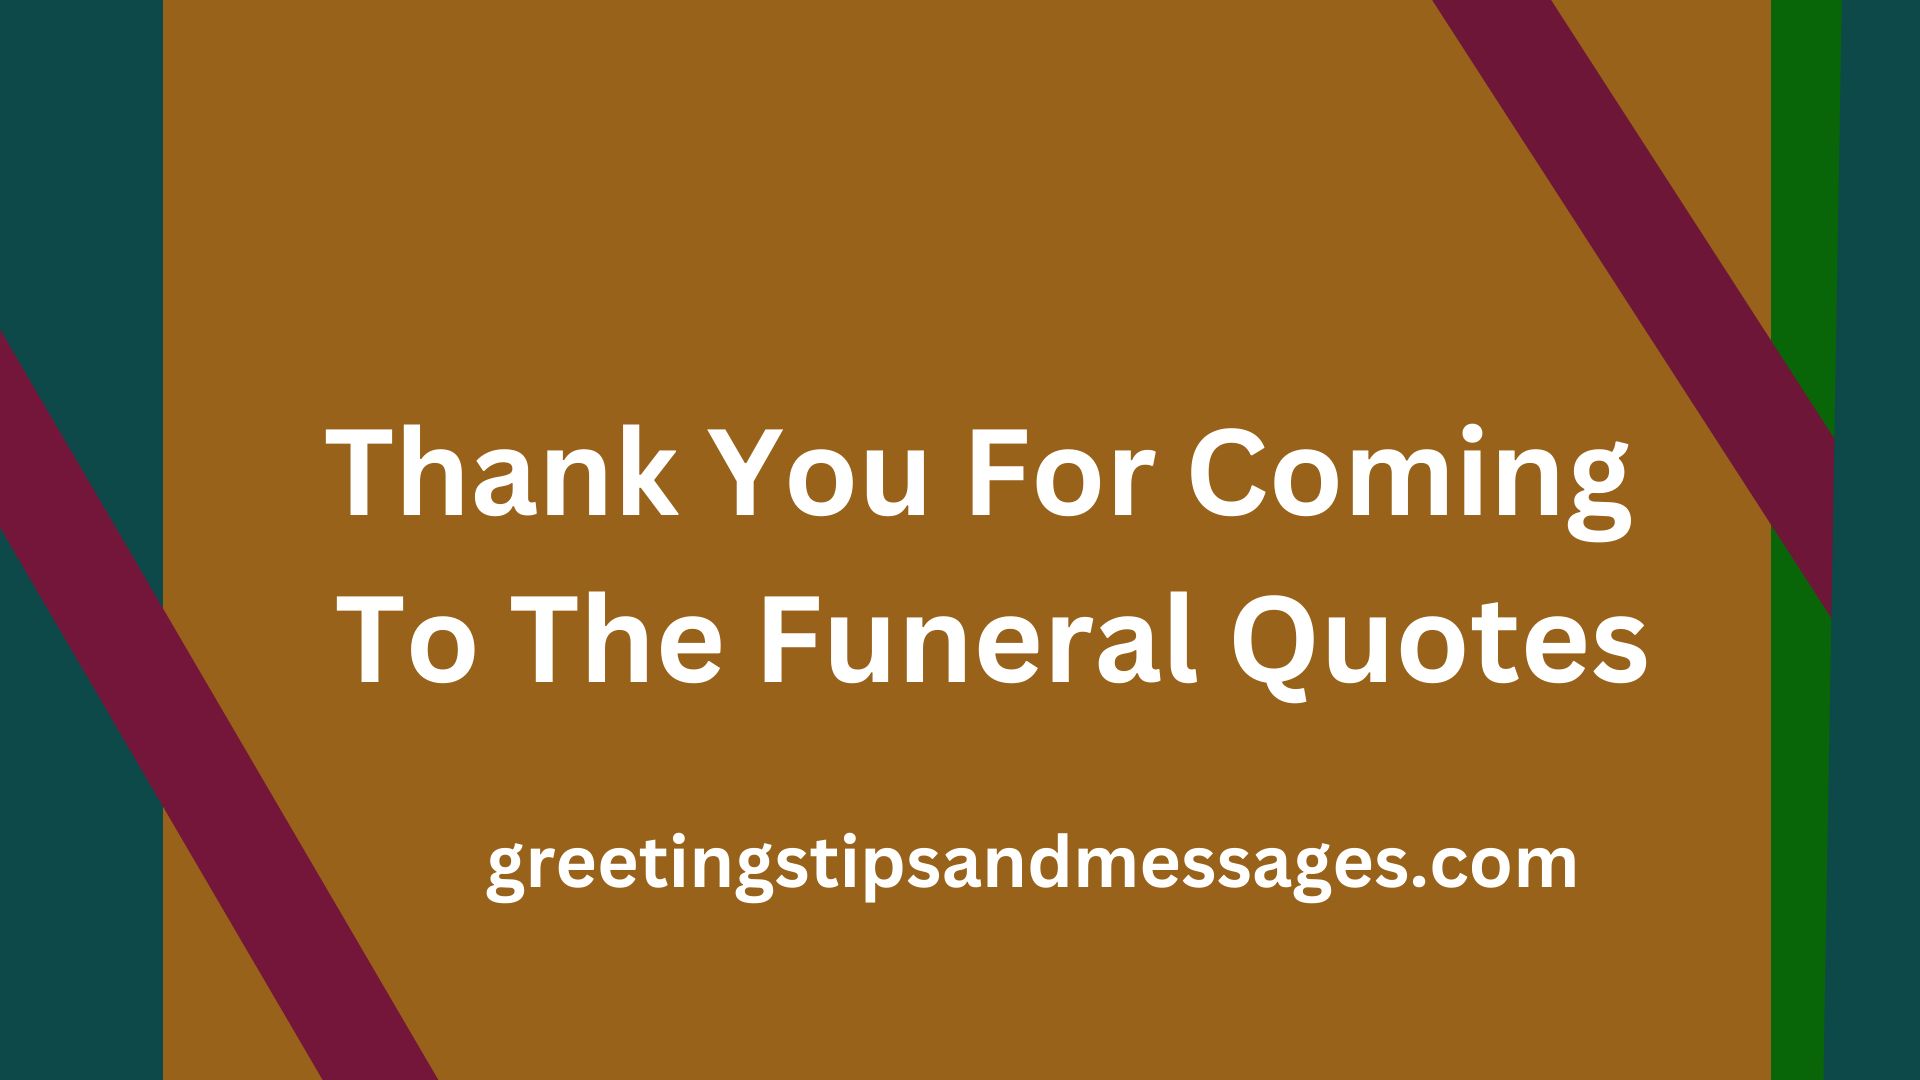 Thank You For Coming To The Funeral Quotes